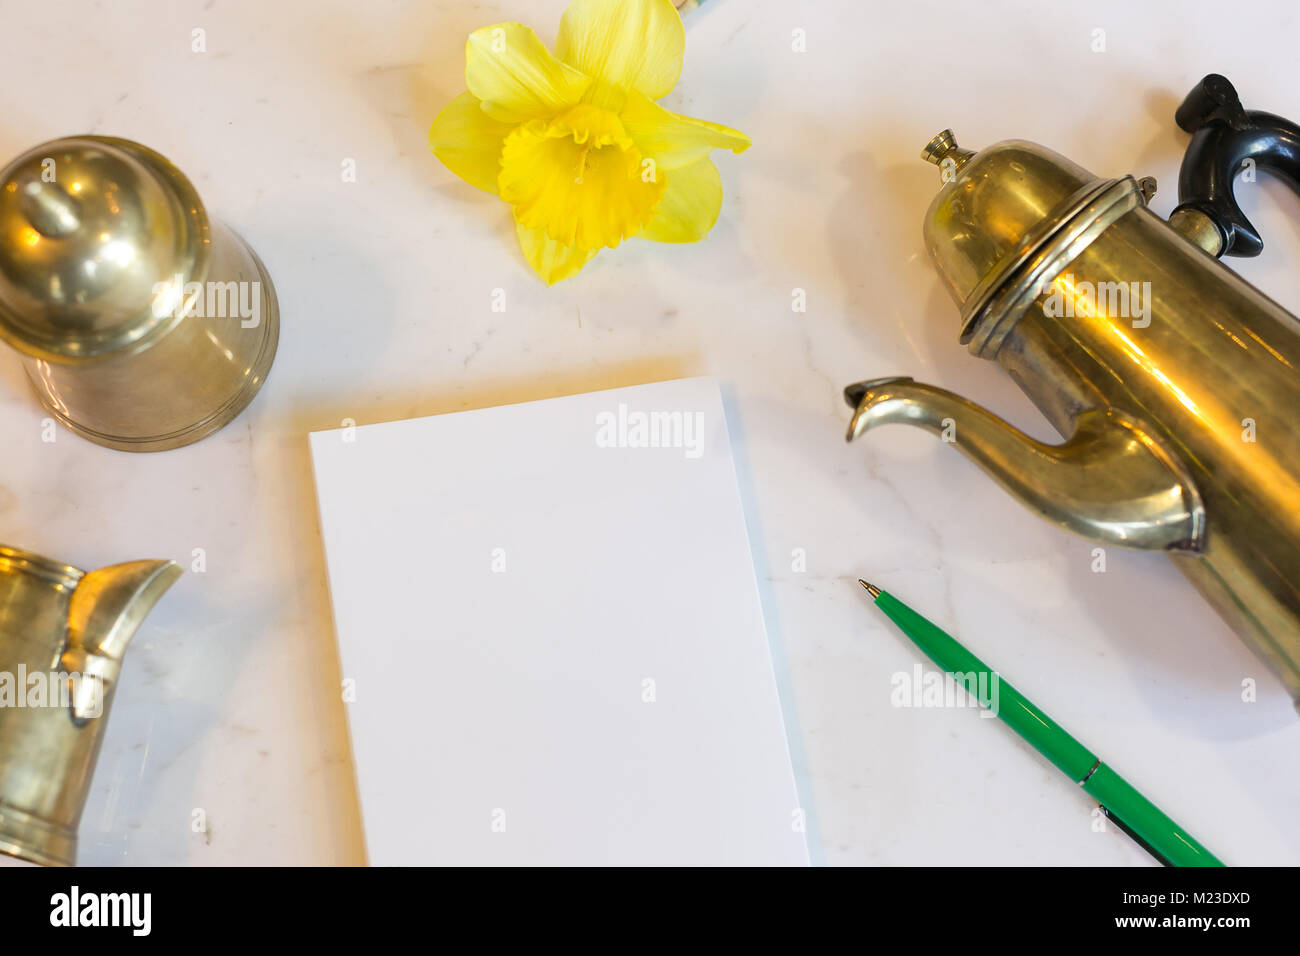 drawing, tea ceremony, rest concept. on the marble table there is vintage bronze teapot and small bell made of the same material, they are placed by s Stock Photo